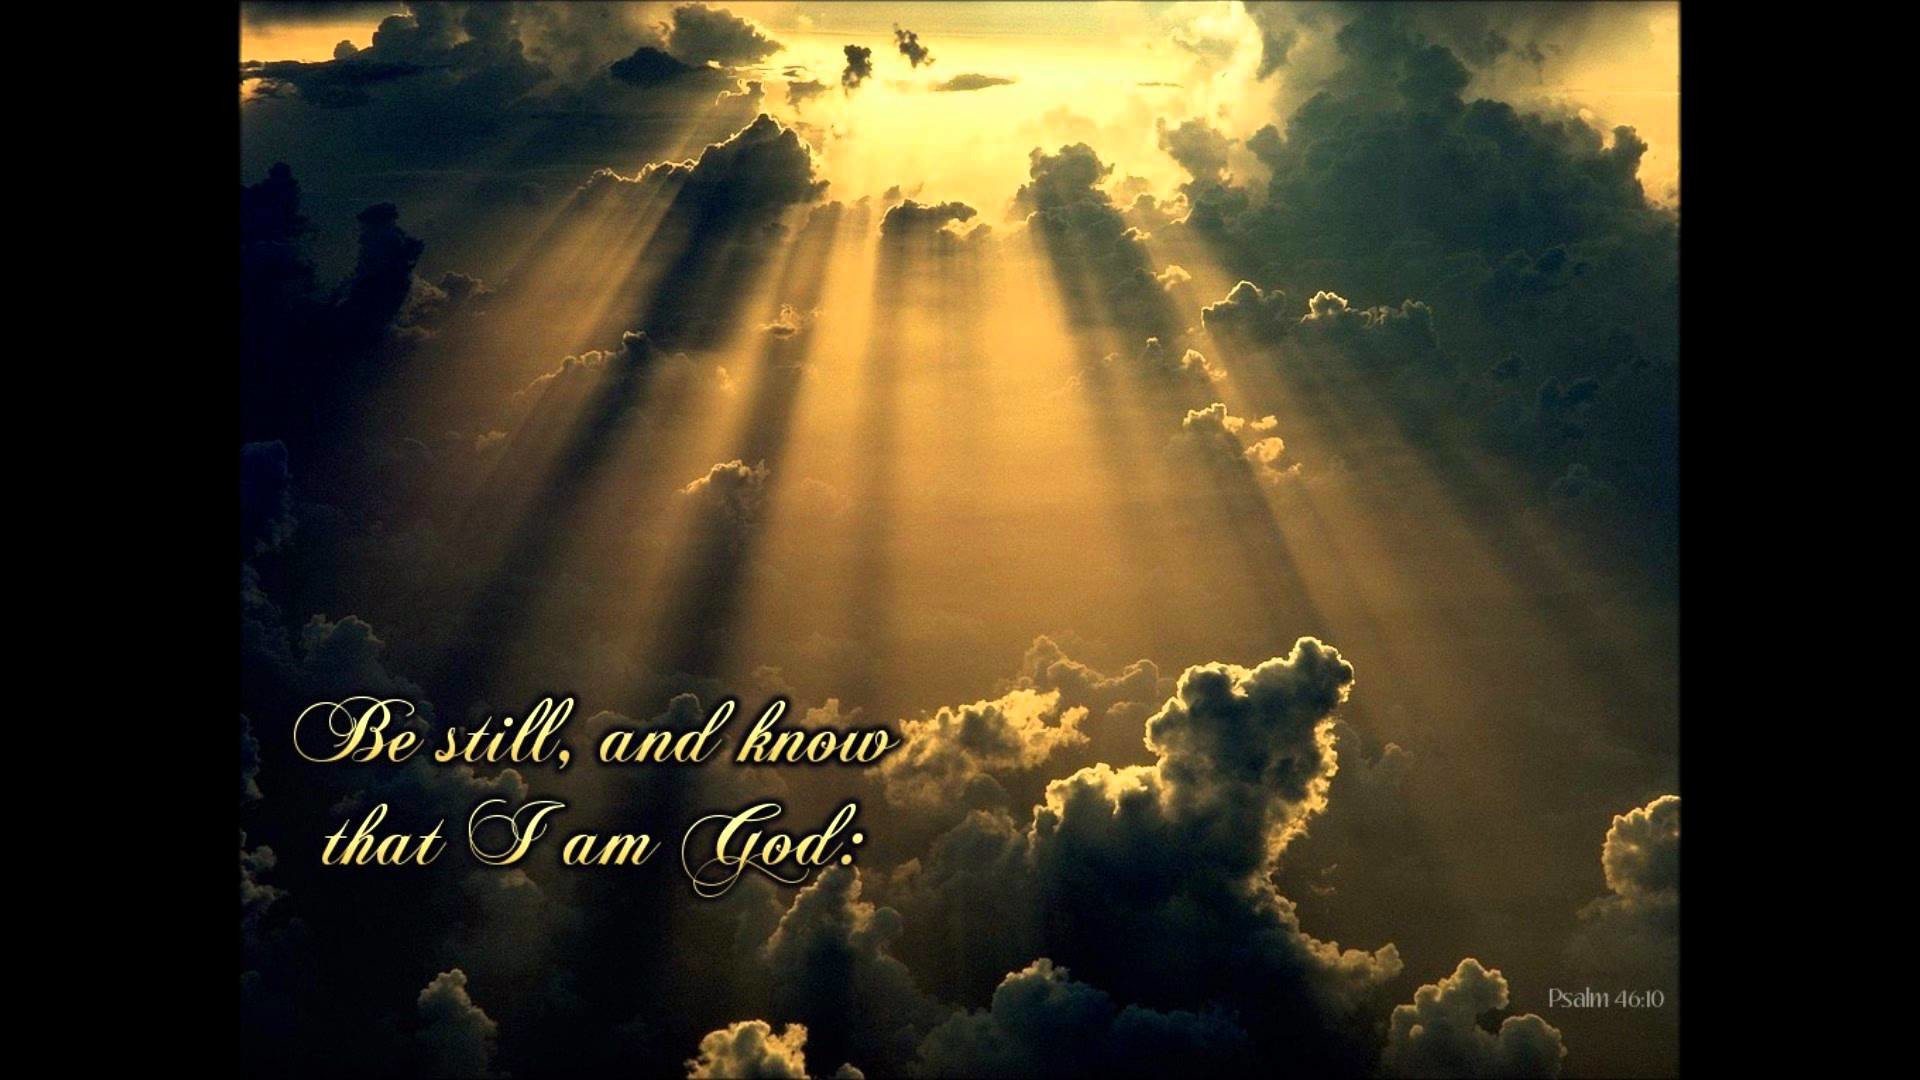 1920x1080 Jenny Nolen message on Be Still and Know That I Am God based on Psalm 46 10